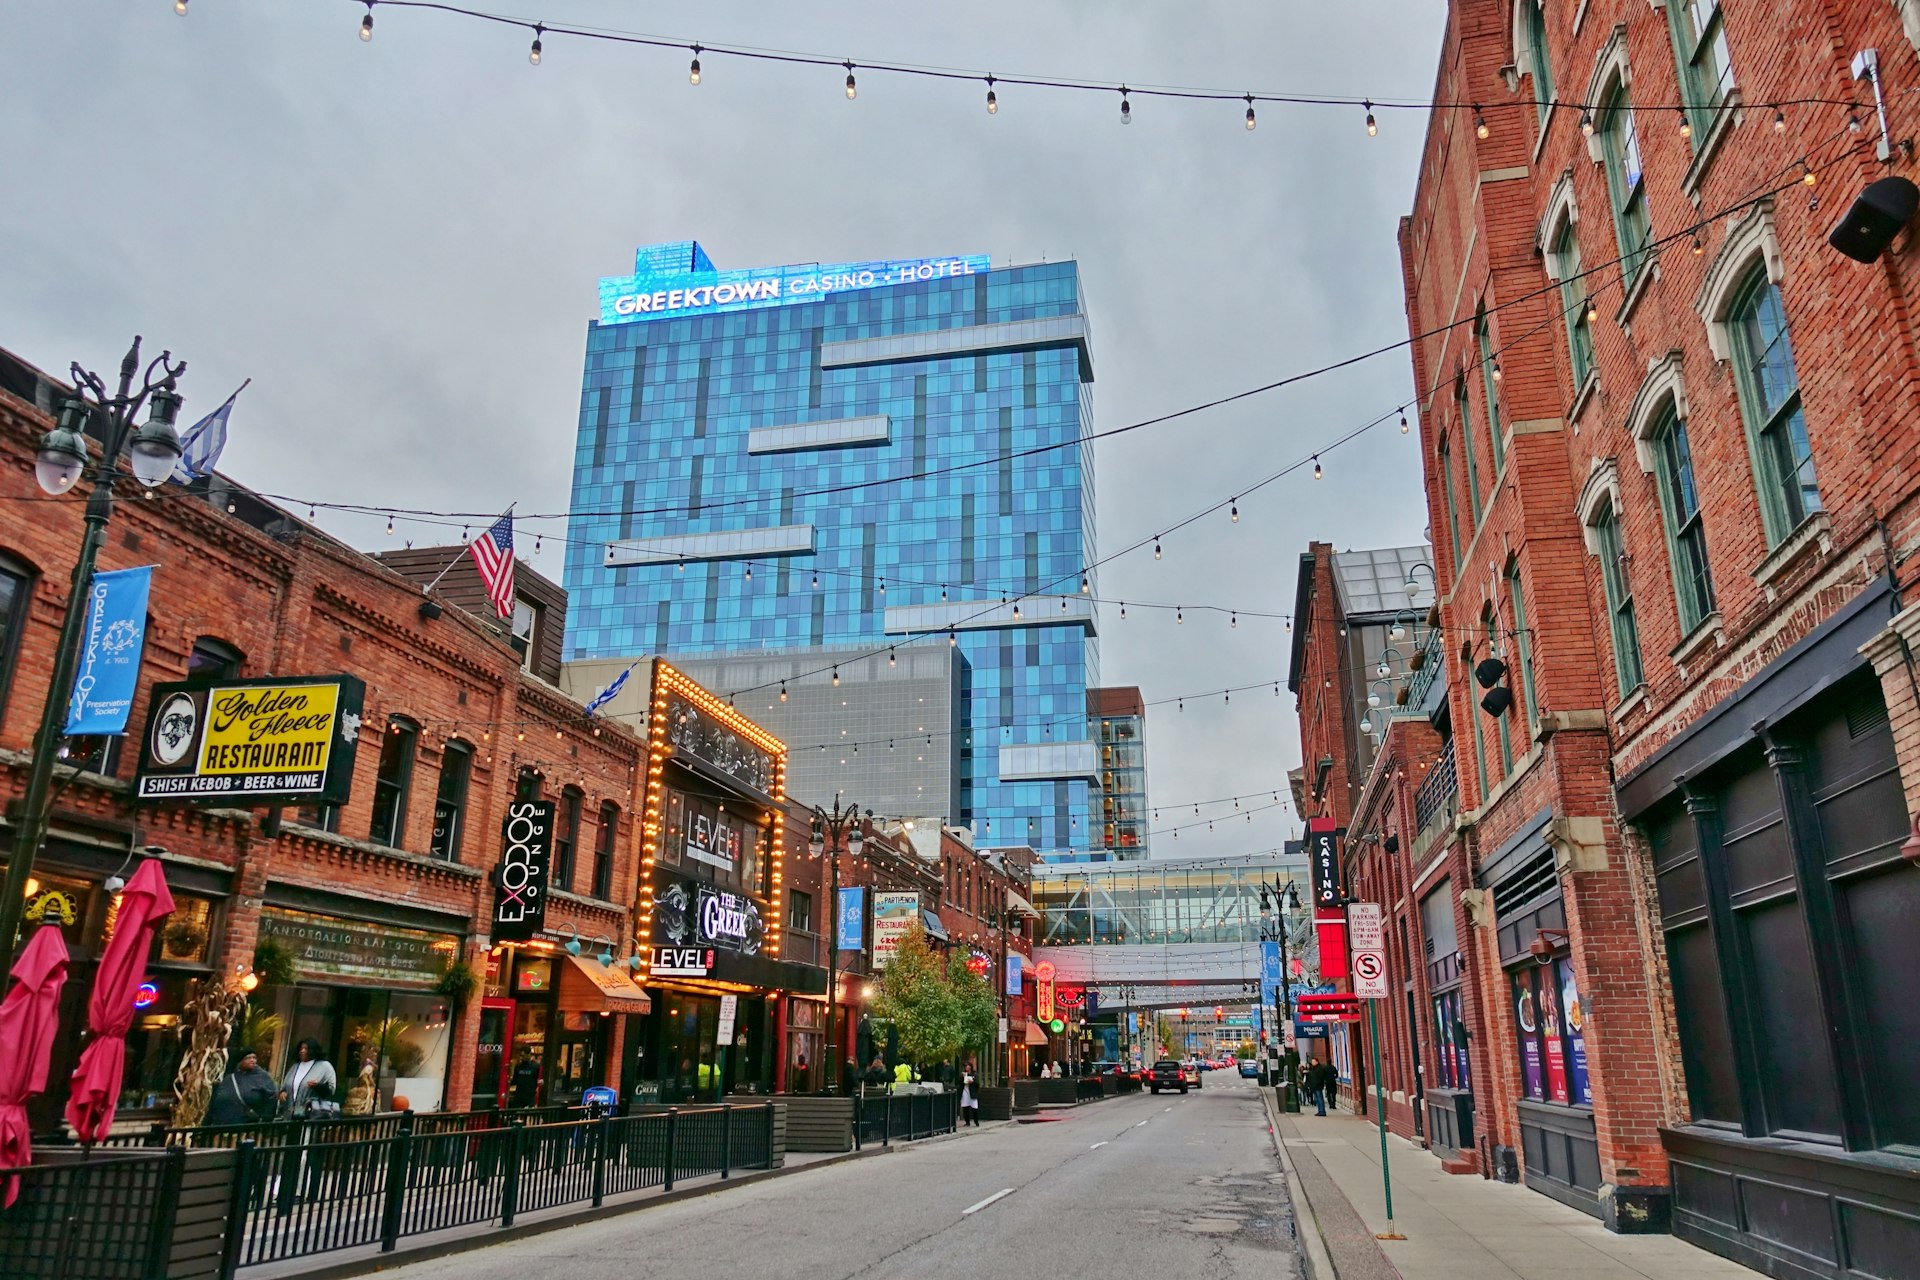 Storefronts in Greektown, a historic commercial and entertainment district in Detroit